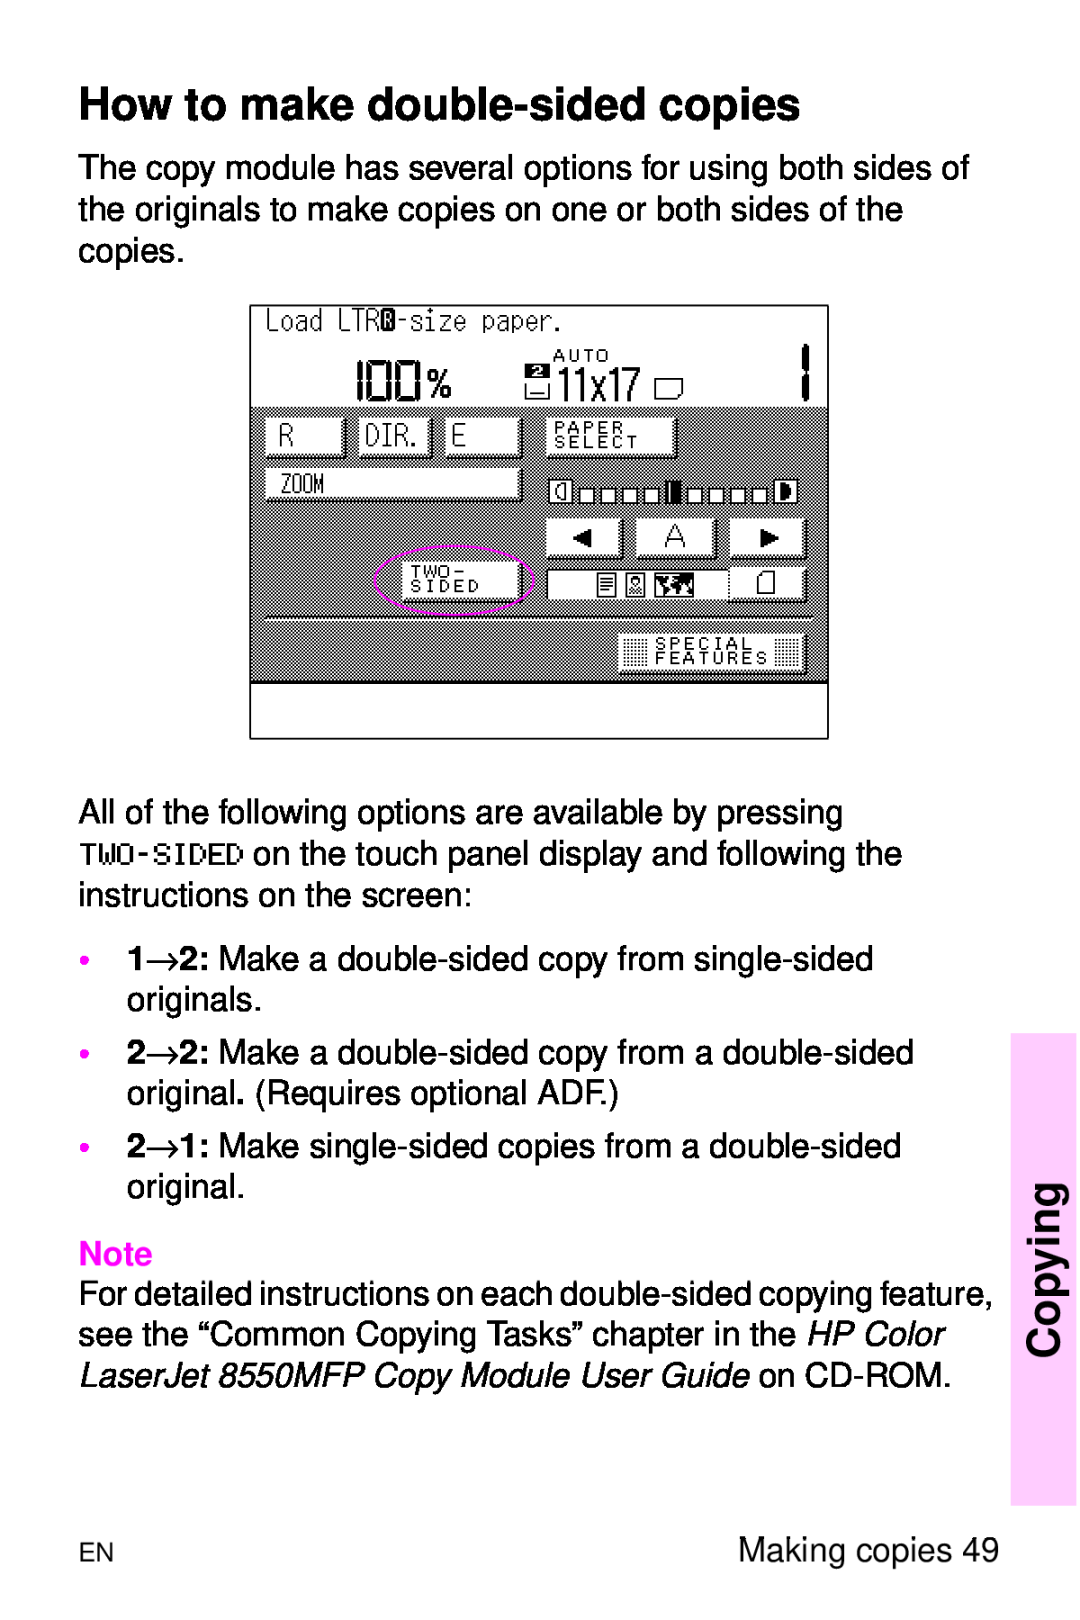 HP 8000 s manual How to make double-sided copies, Copying, 1→2 Make a double-sided copy from single-sided originals 